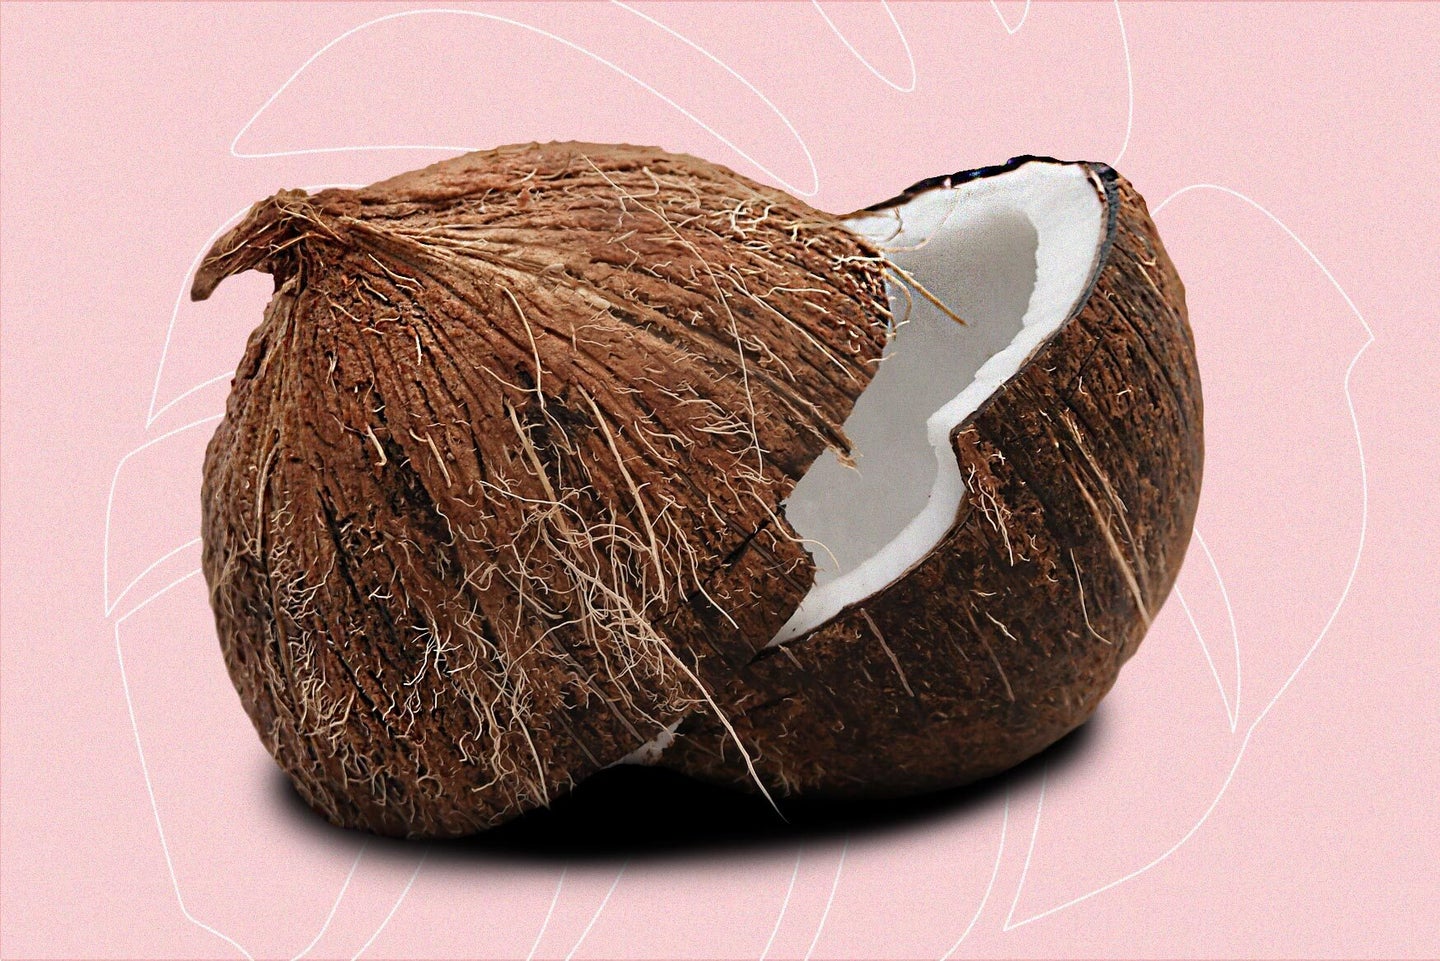 A cracked-open coconut on a light pink background with the white outline of a palm leaf underneath.